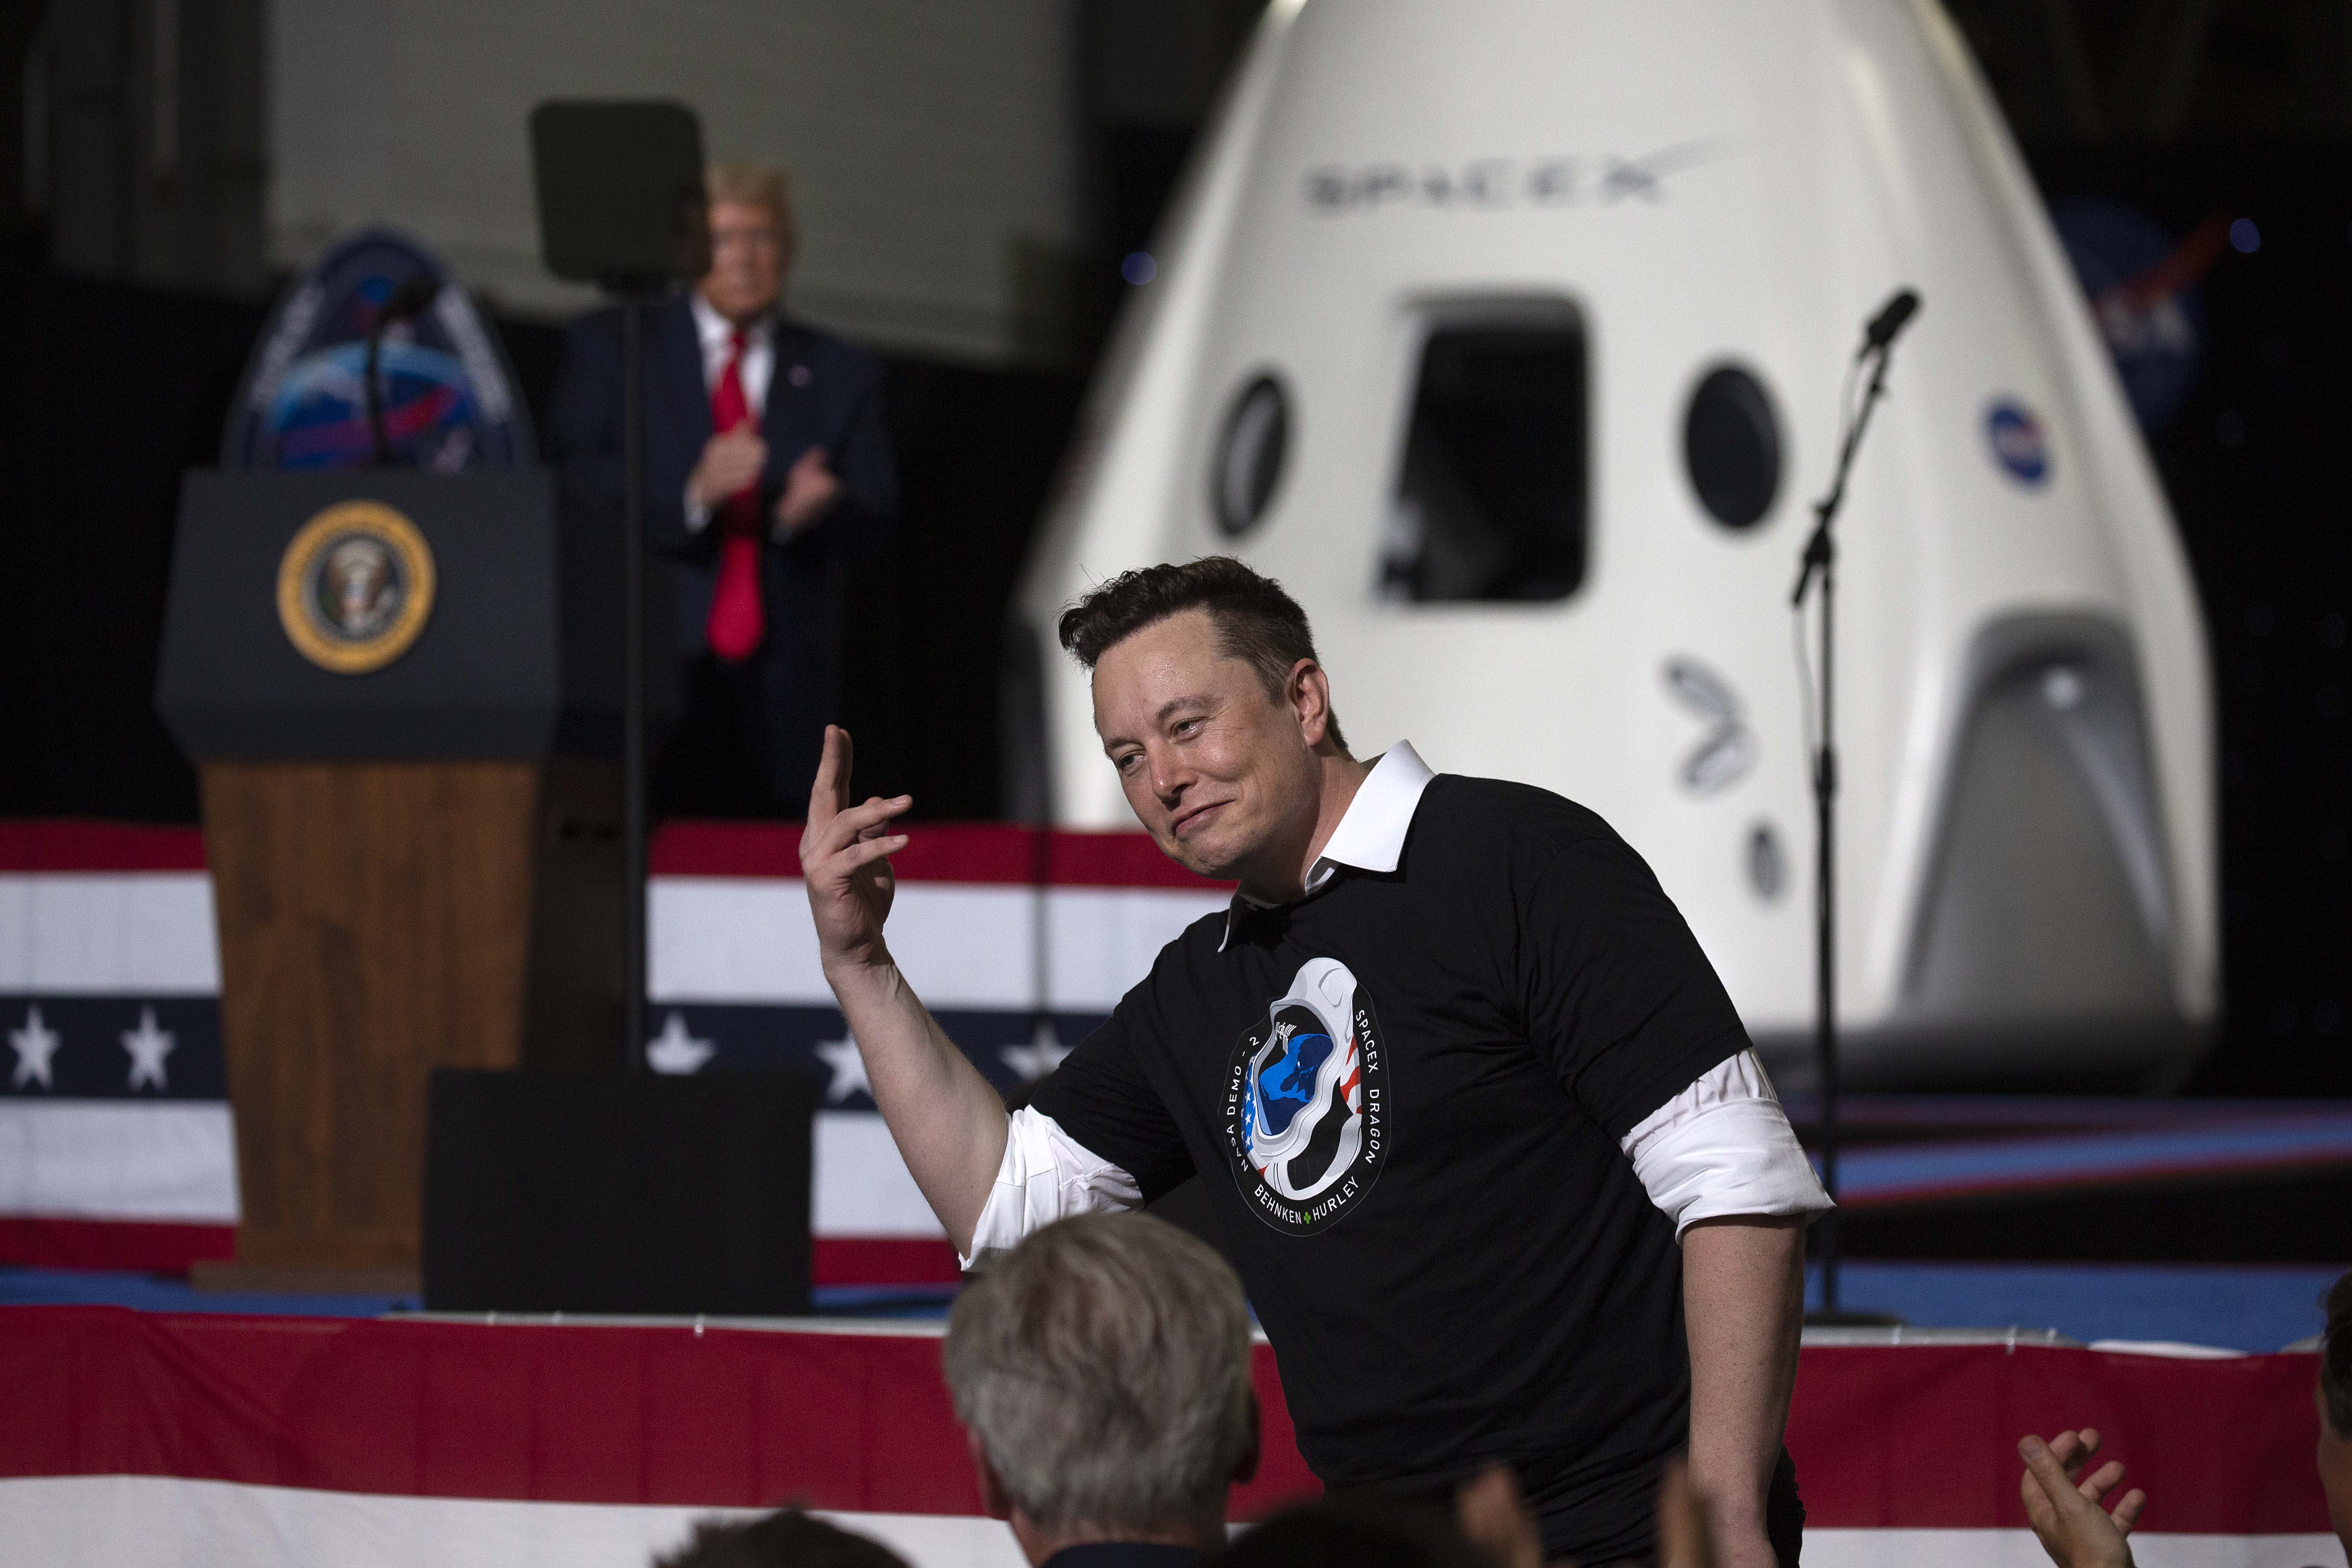 How SpaceX won the race against Boeing to send NASA astronauts to space - CNBC